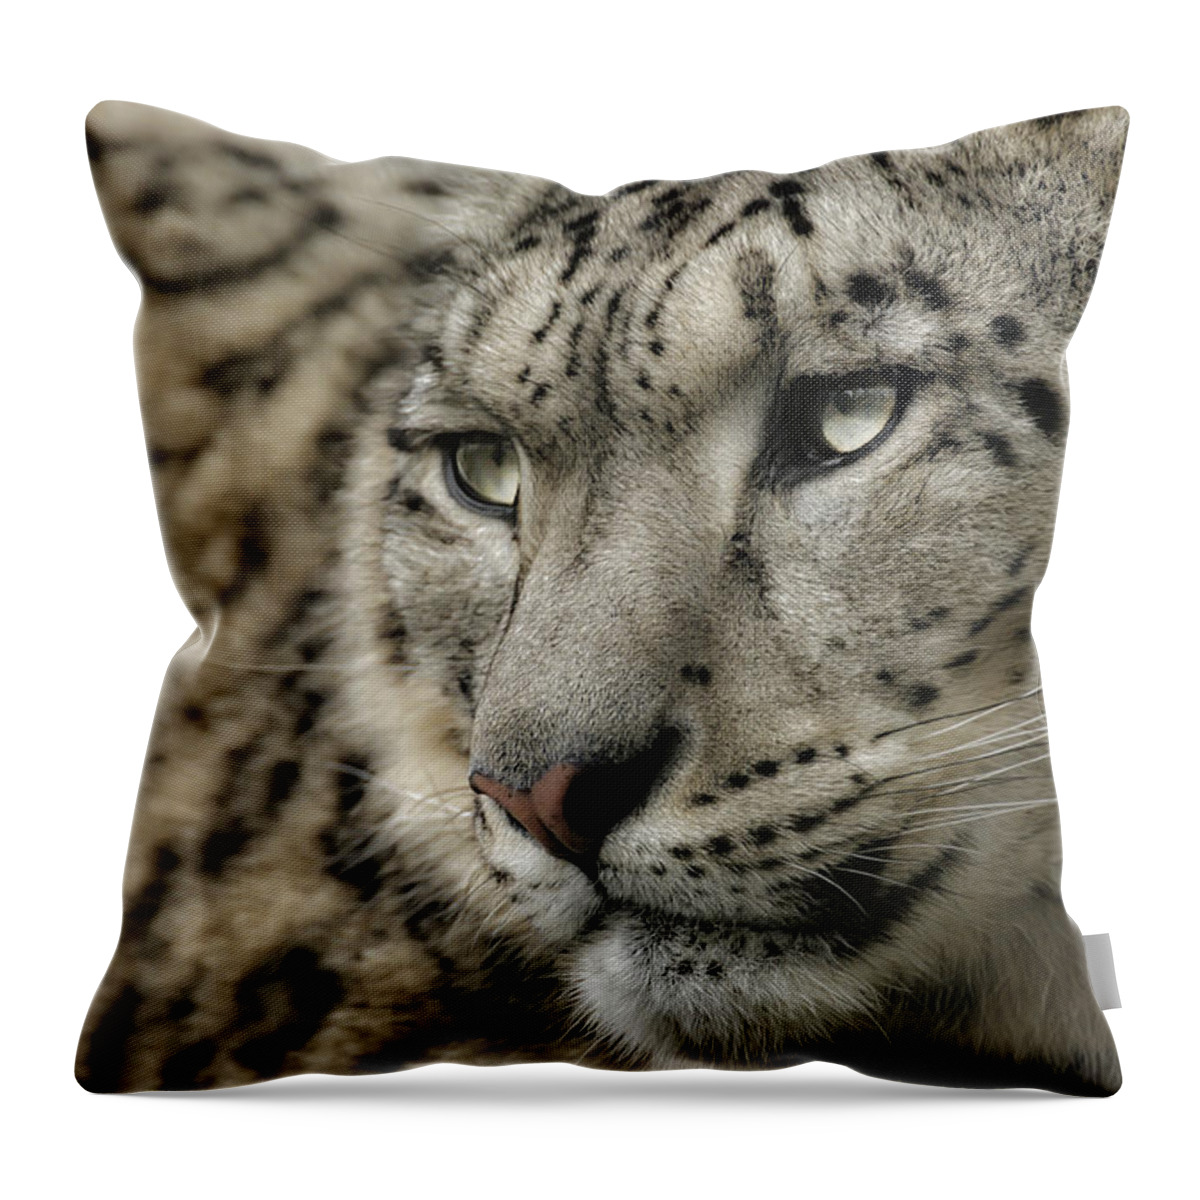 Snow Leopard Throw Pillow featuring the photograph Eyes of a Snow Leopard by Chris Boulton